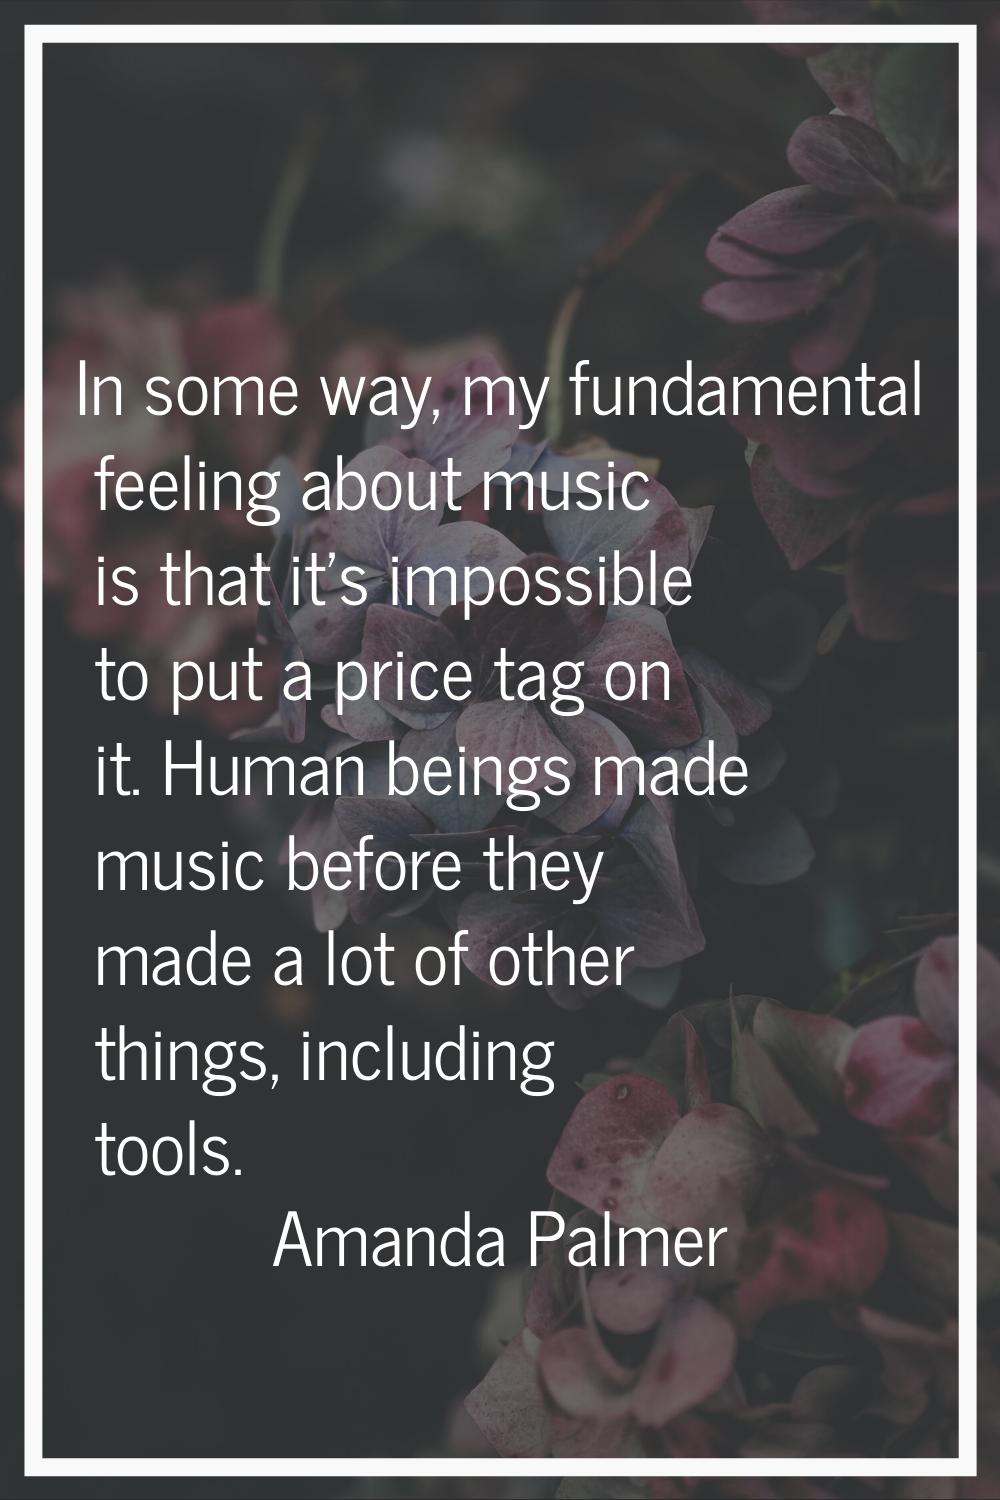 In some way, my fundamental feeling about music is that it's impossible to put a price tag on it. H